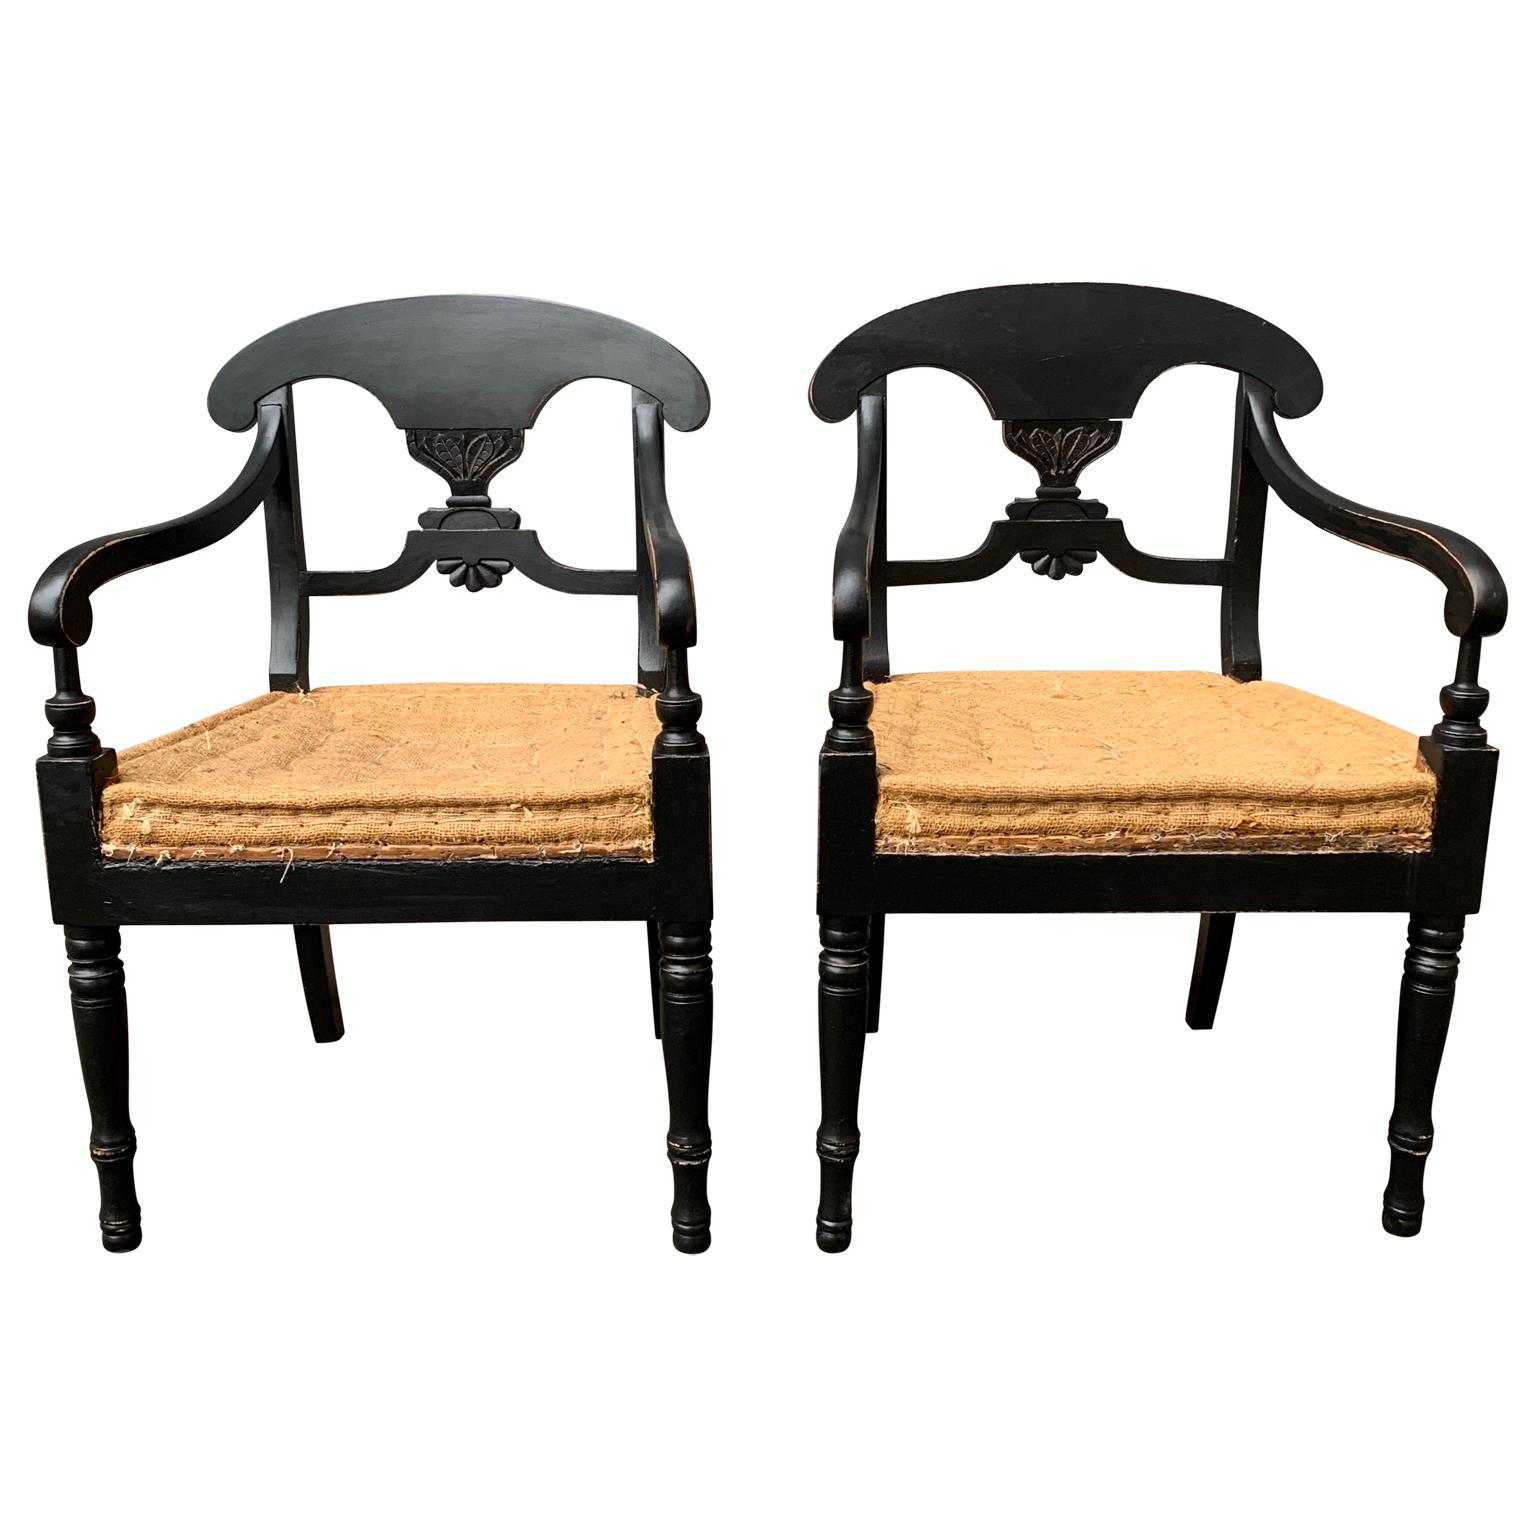 A pair of Karl Johan Swedish Empire dining black painted armchair. From early 19th century Empire period.

Please note that this chest of drawers is located in Halmstad Sweden.
EUR 100 delivery to most areas of London UK, The Netherlands, Belgium,